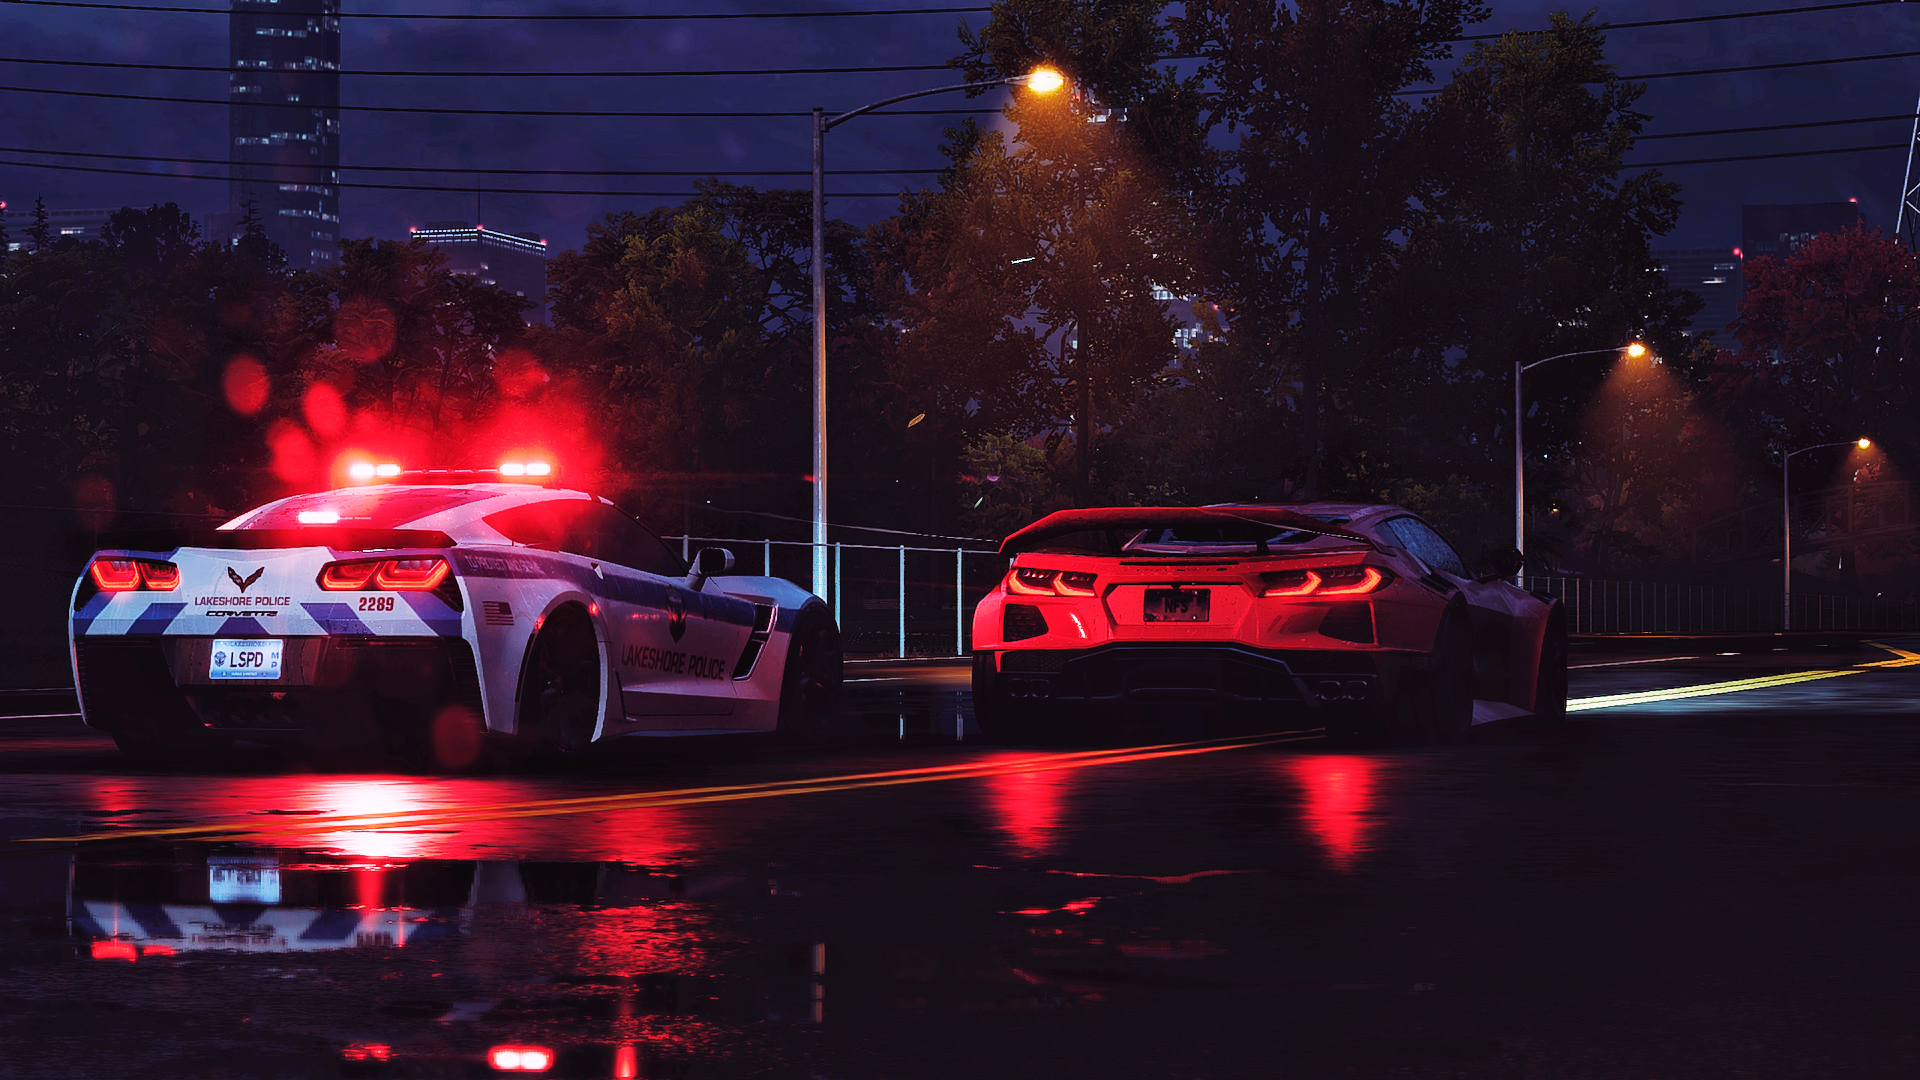 General 1920x1080 Need for speed Unbound Need for Speed edit race cars car park car 4K gaming video games drift EA Games Criterion Games night taillights street light police cars reflection licence plates